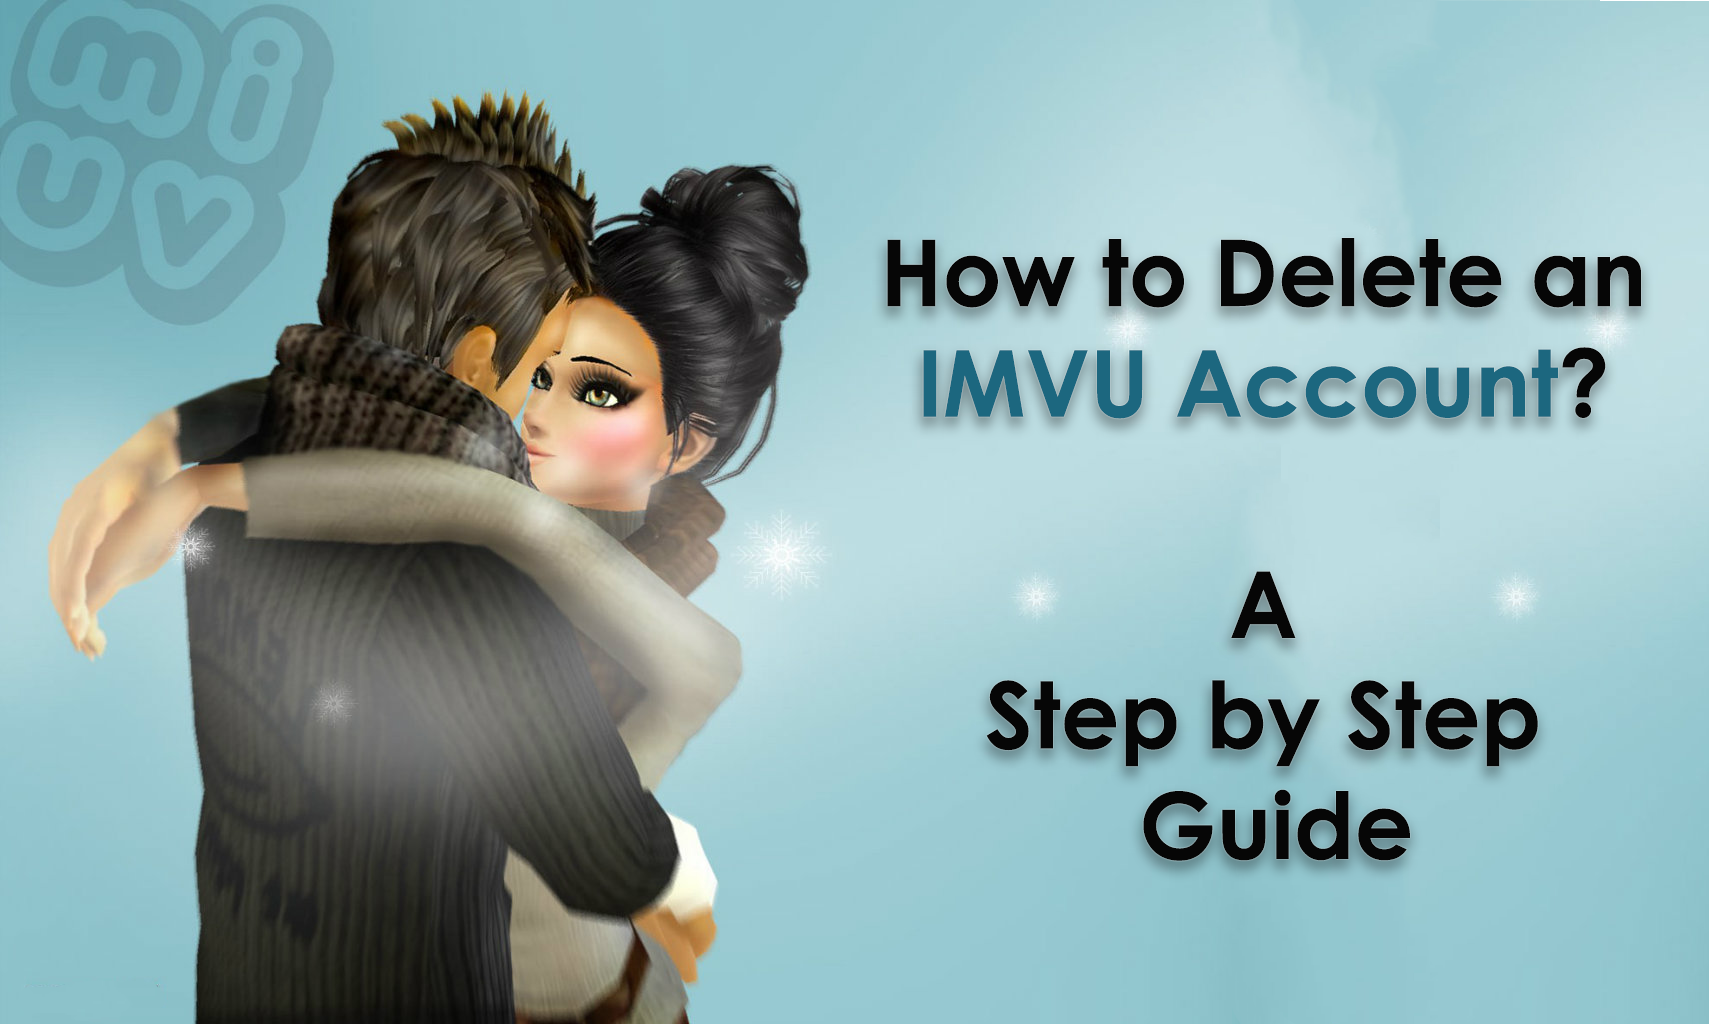 How to Delete an IMVU Account? Step by Step Guide